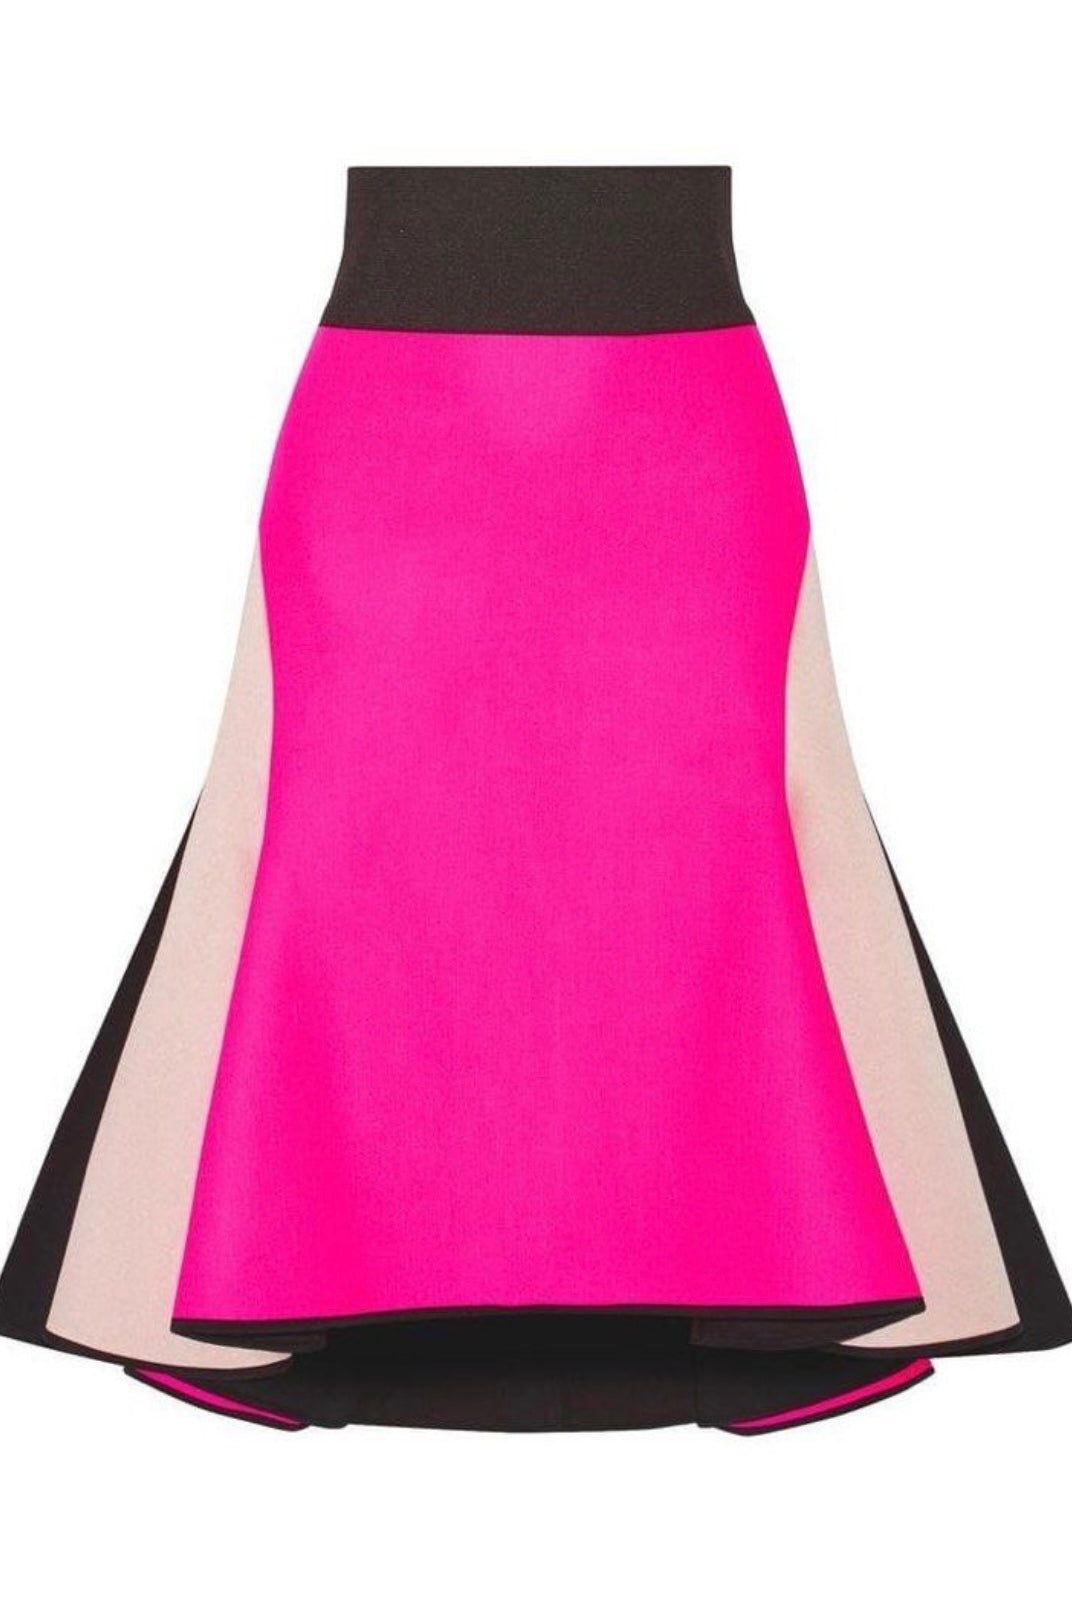 MILLY - Asymmetric melton wool-blend and satin Colorblock skirt